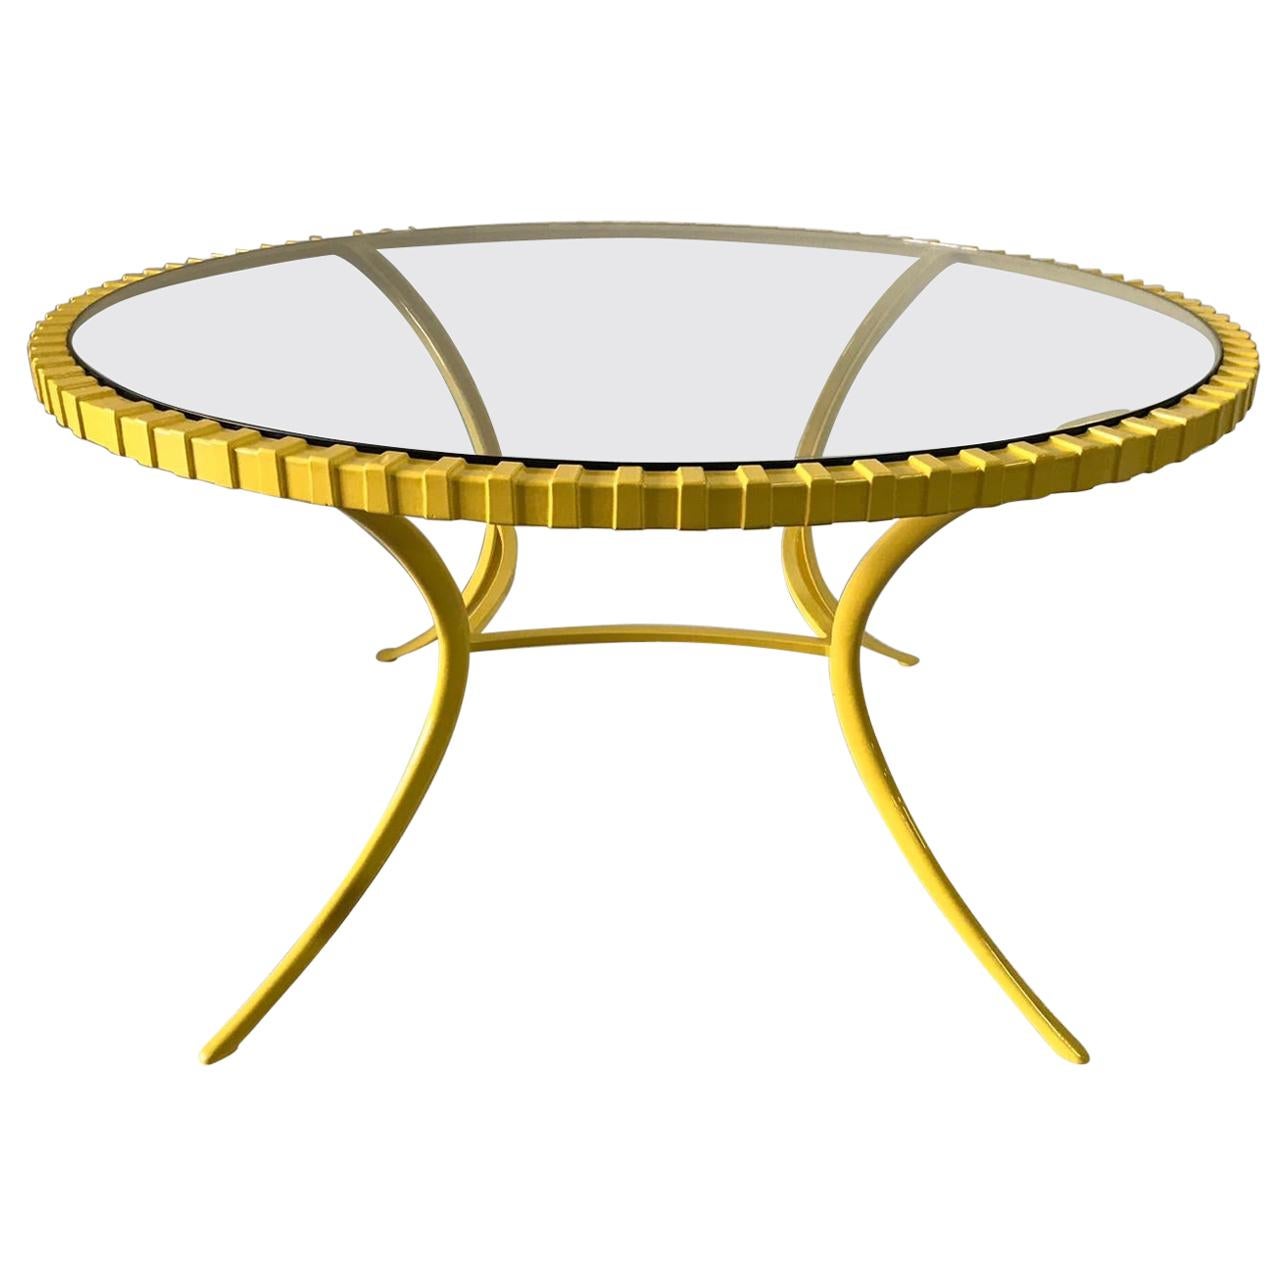 Large Round Canary Yellow Klismos Table by Thinline